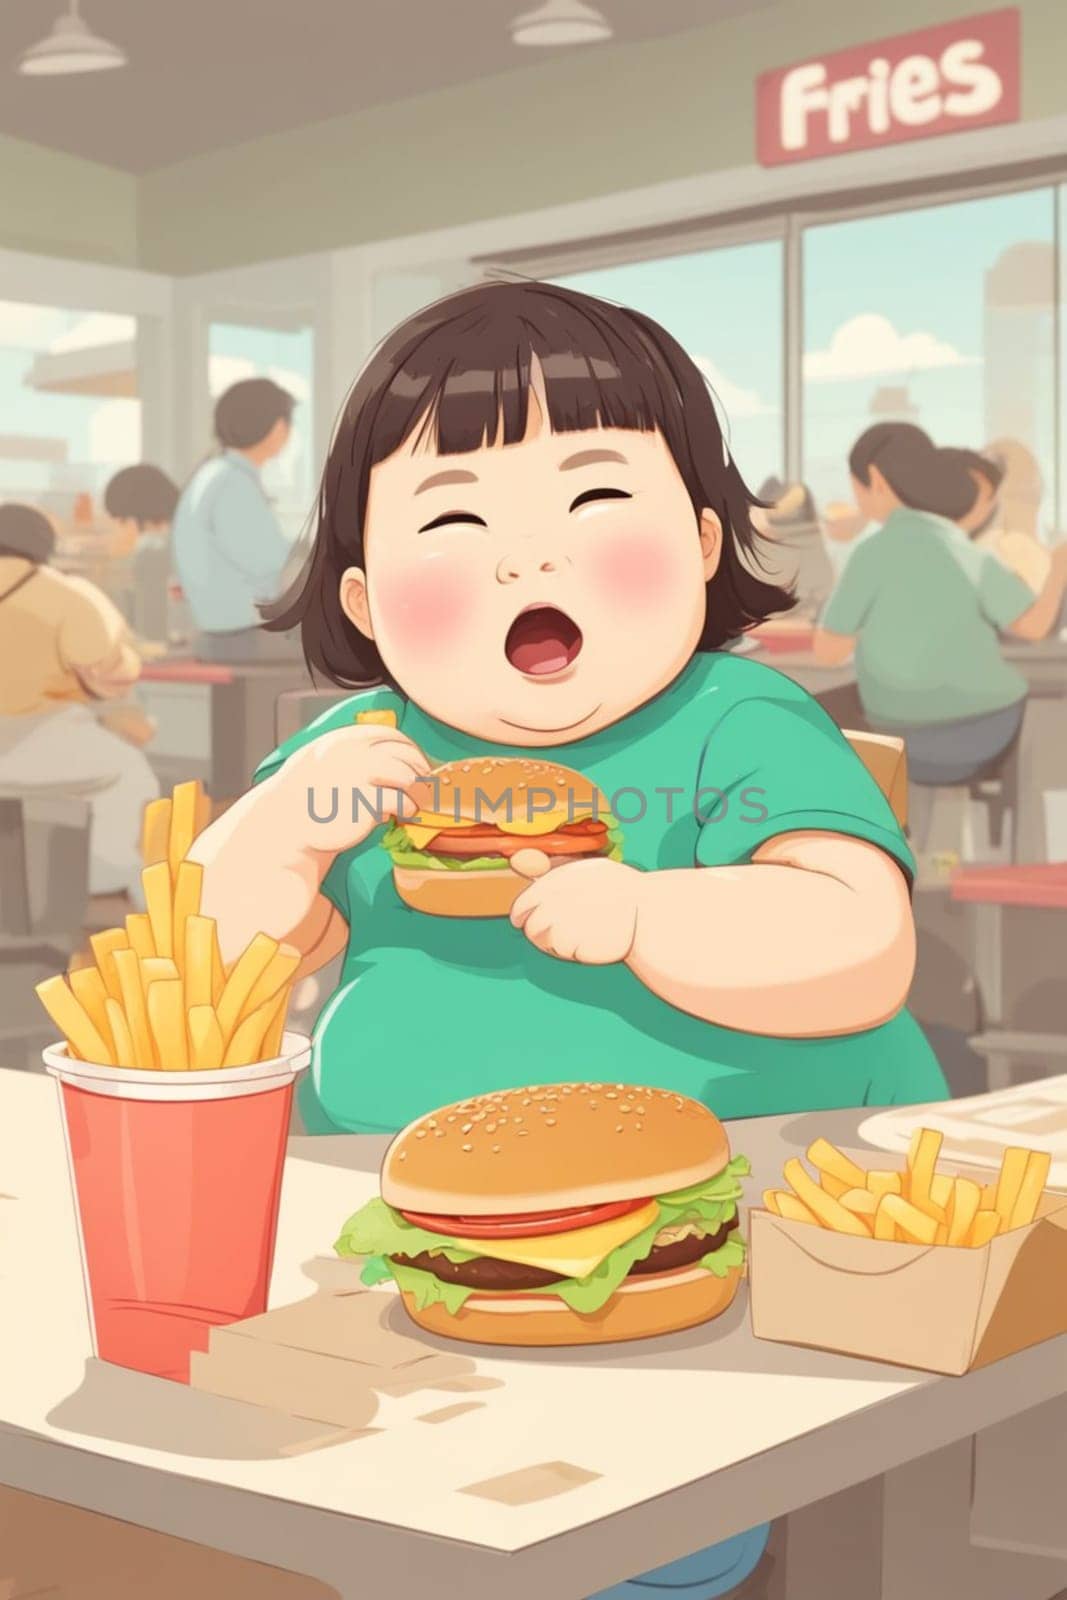 obese boy girl eating fast food , hamburger, french fries - unhealthy eating concept illustration by verbano